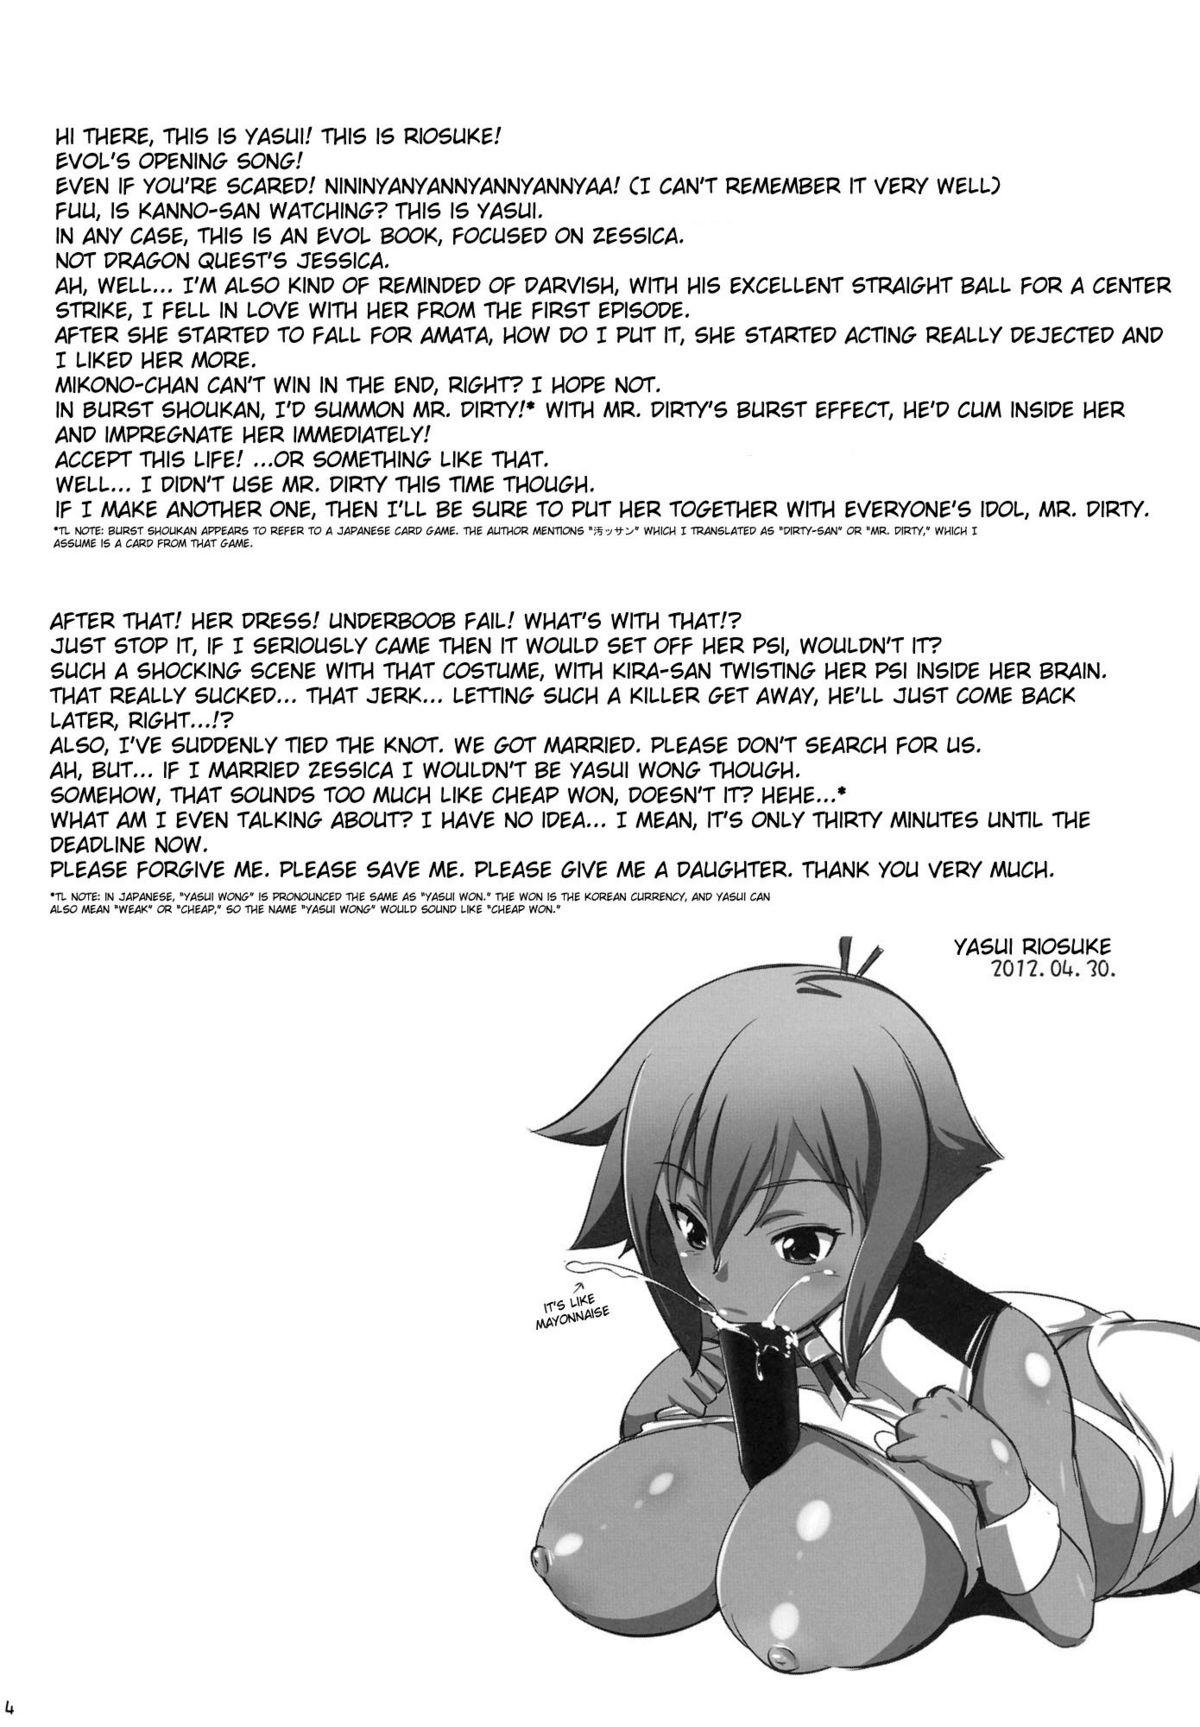 Deflowered Combine Dependence - Aquarion evol Doctor Sex - Page 3